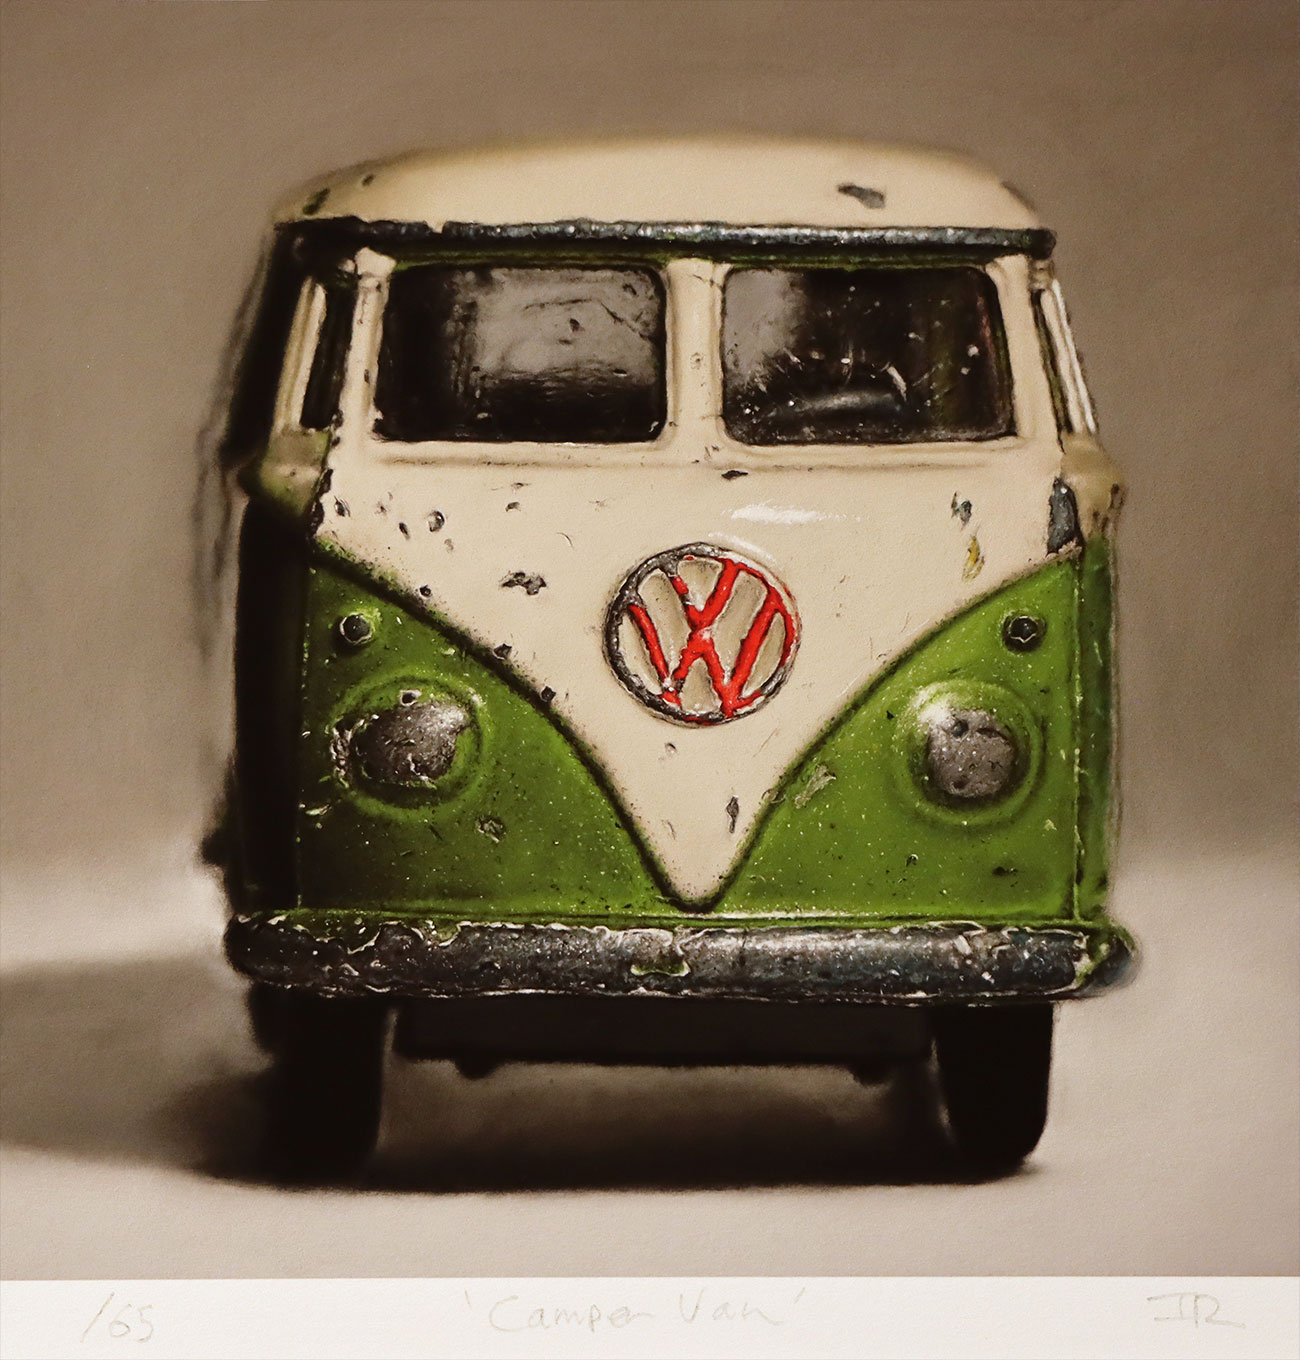 Ian Rawling, Signed limited edition print, Camper Van. Click to enlarge